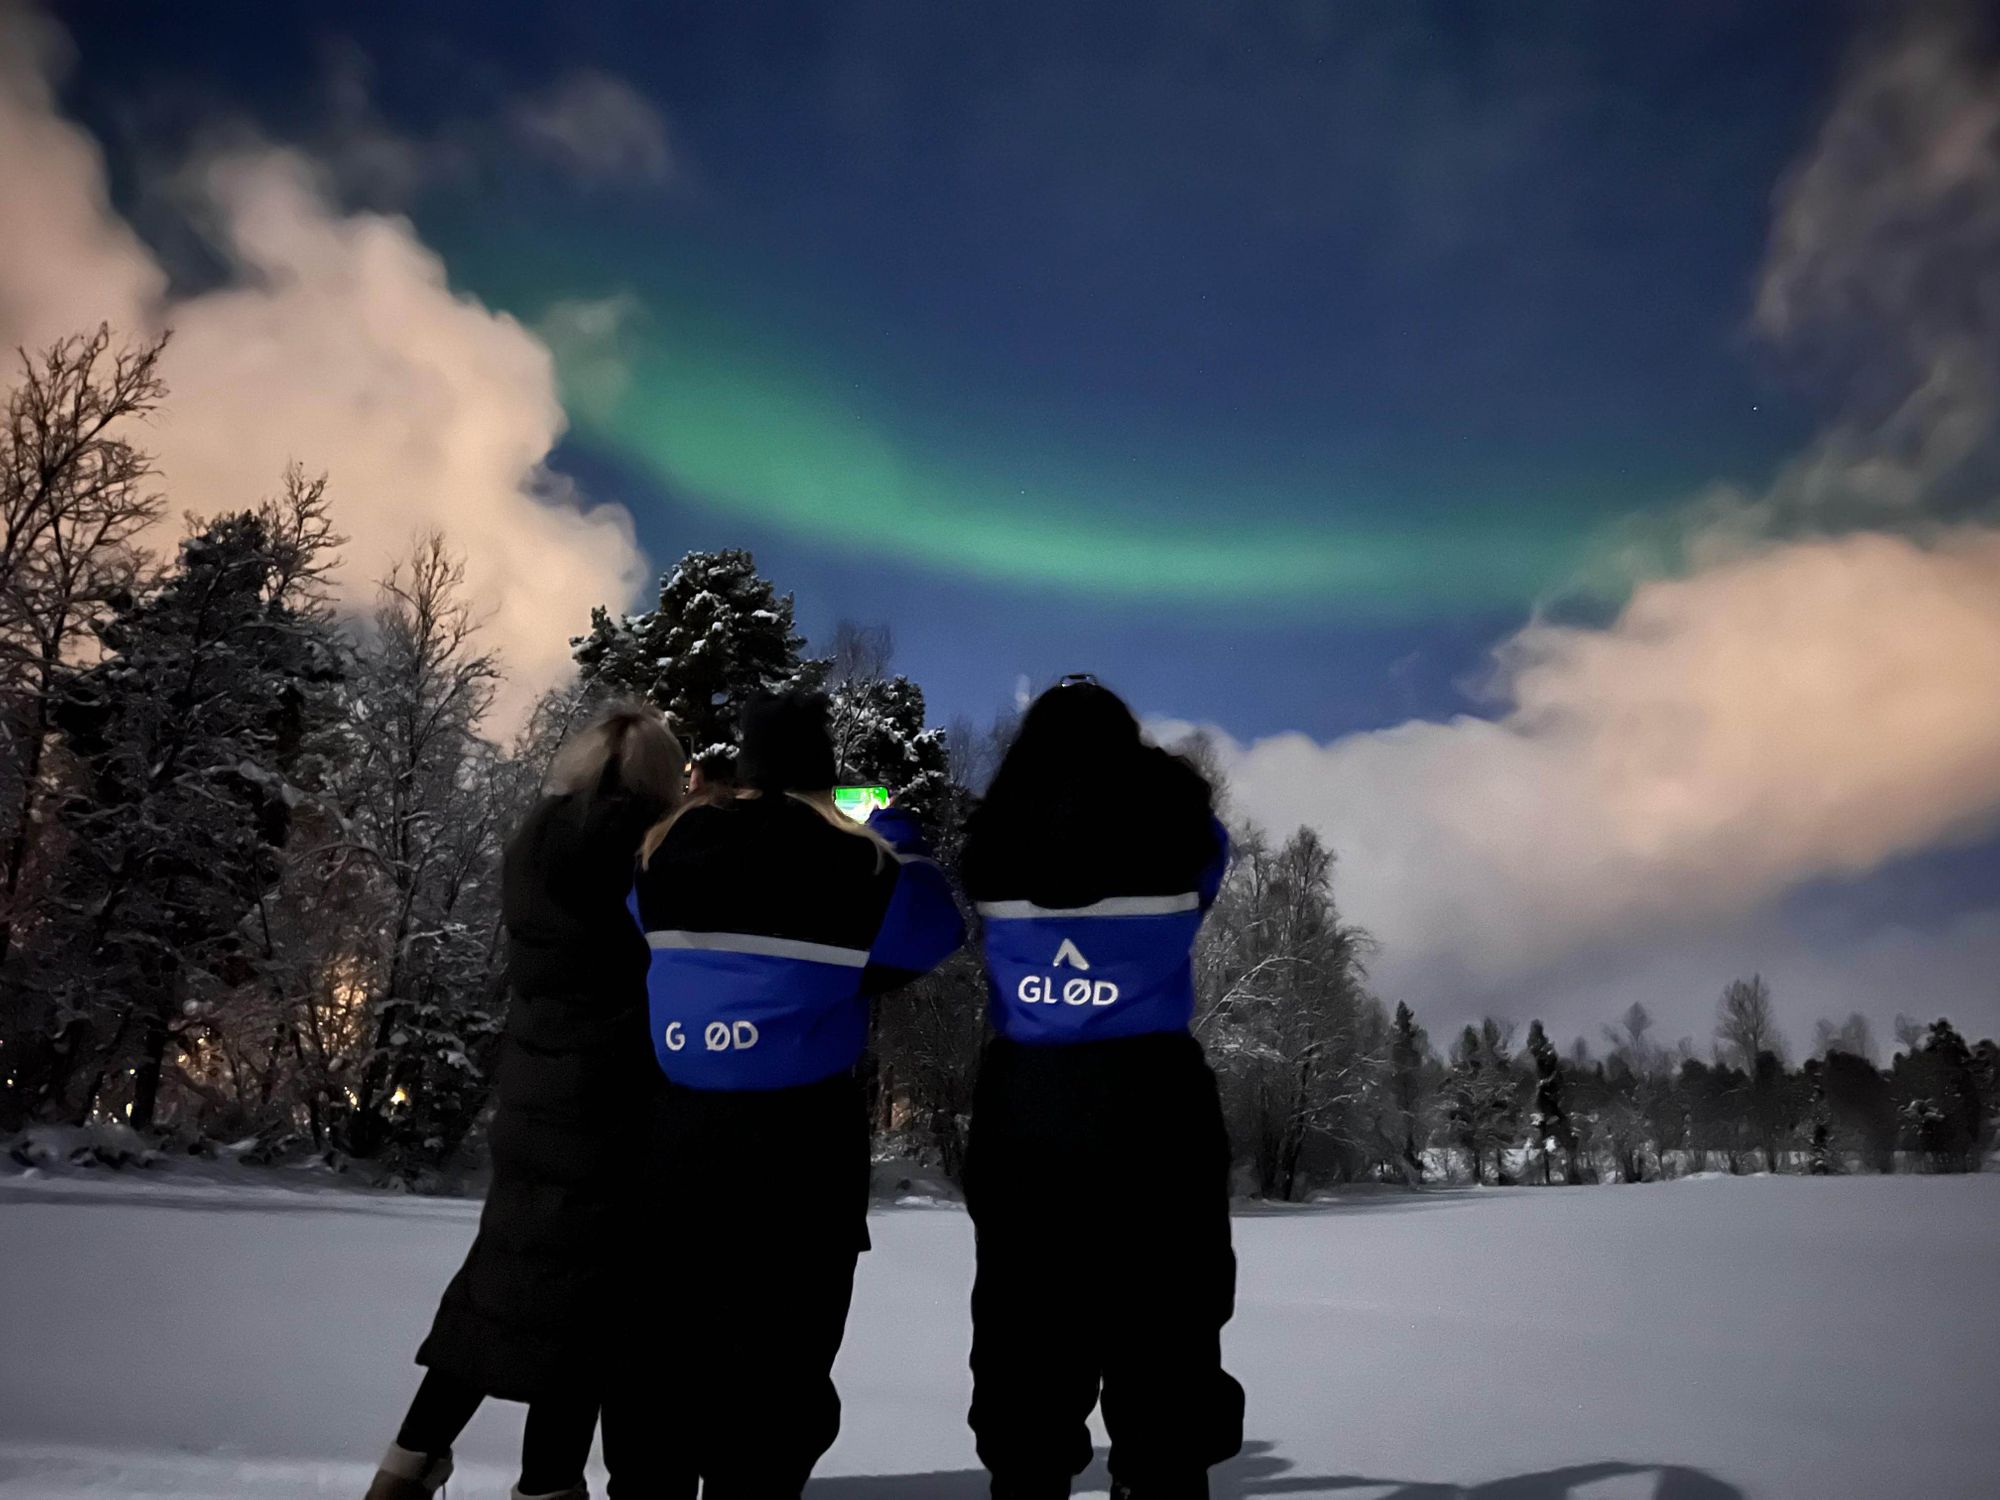 People photograph the northern lights from the shores of a frozen lake.